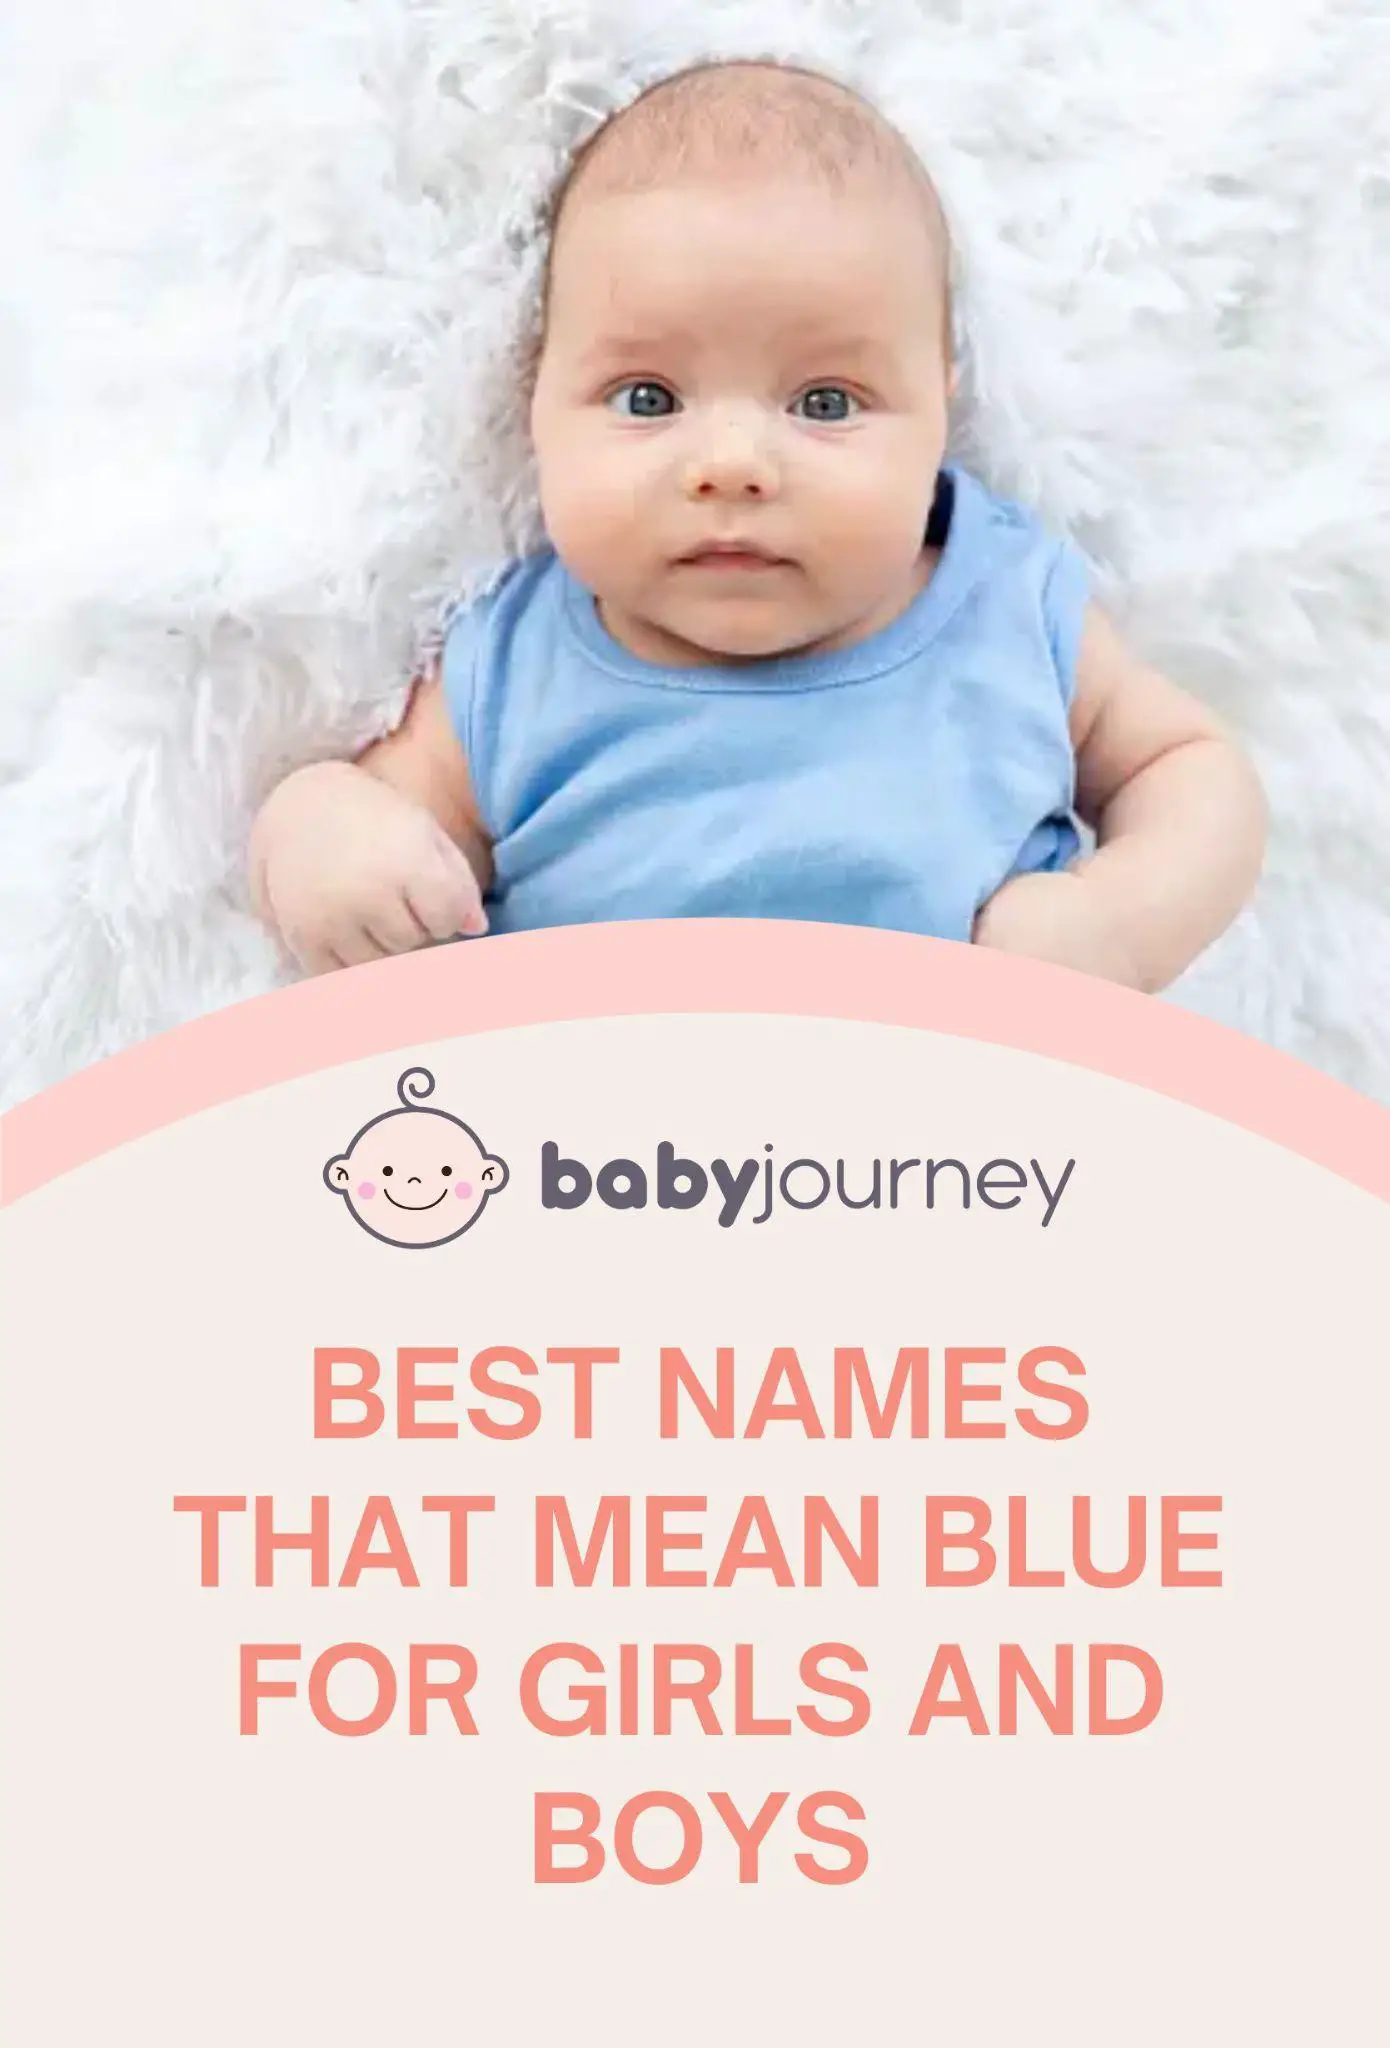 Best Names That Mean Blue for Girls and Boys pinterest - Baby Journey